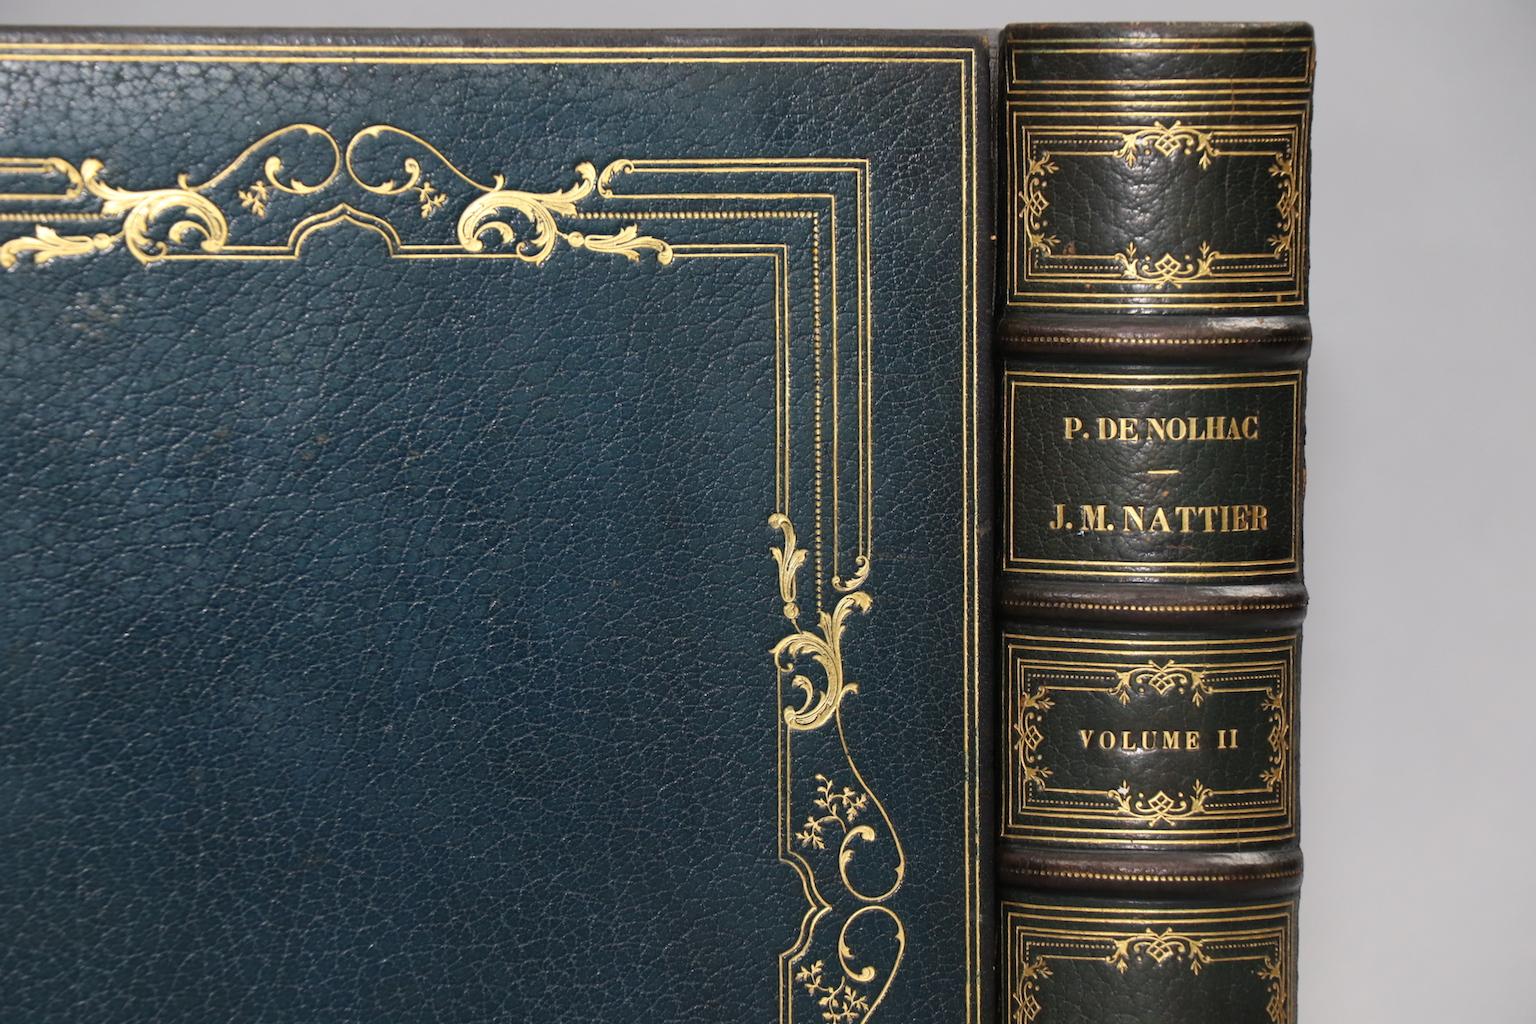 Leatherbound. Two volumes. Folio. Exquisitely bound in full blue morocco with elaborate leather & silk doublers by Chambolle Duru (French Binder). Limited to 10 copies signed by the author, this is #5. Plates in three states (one hand-colored), with